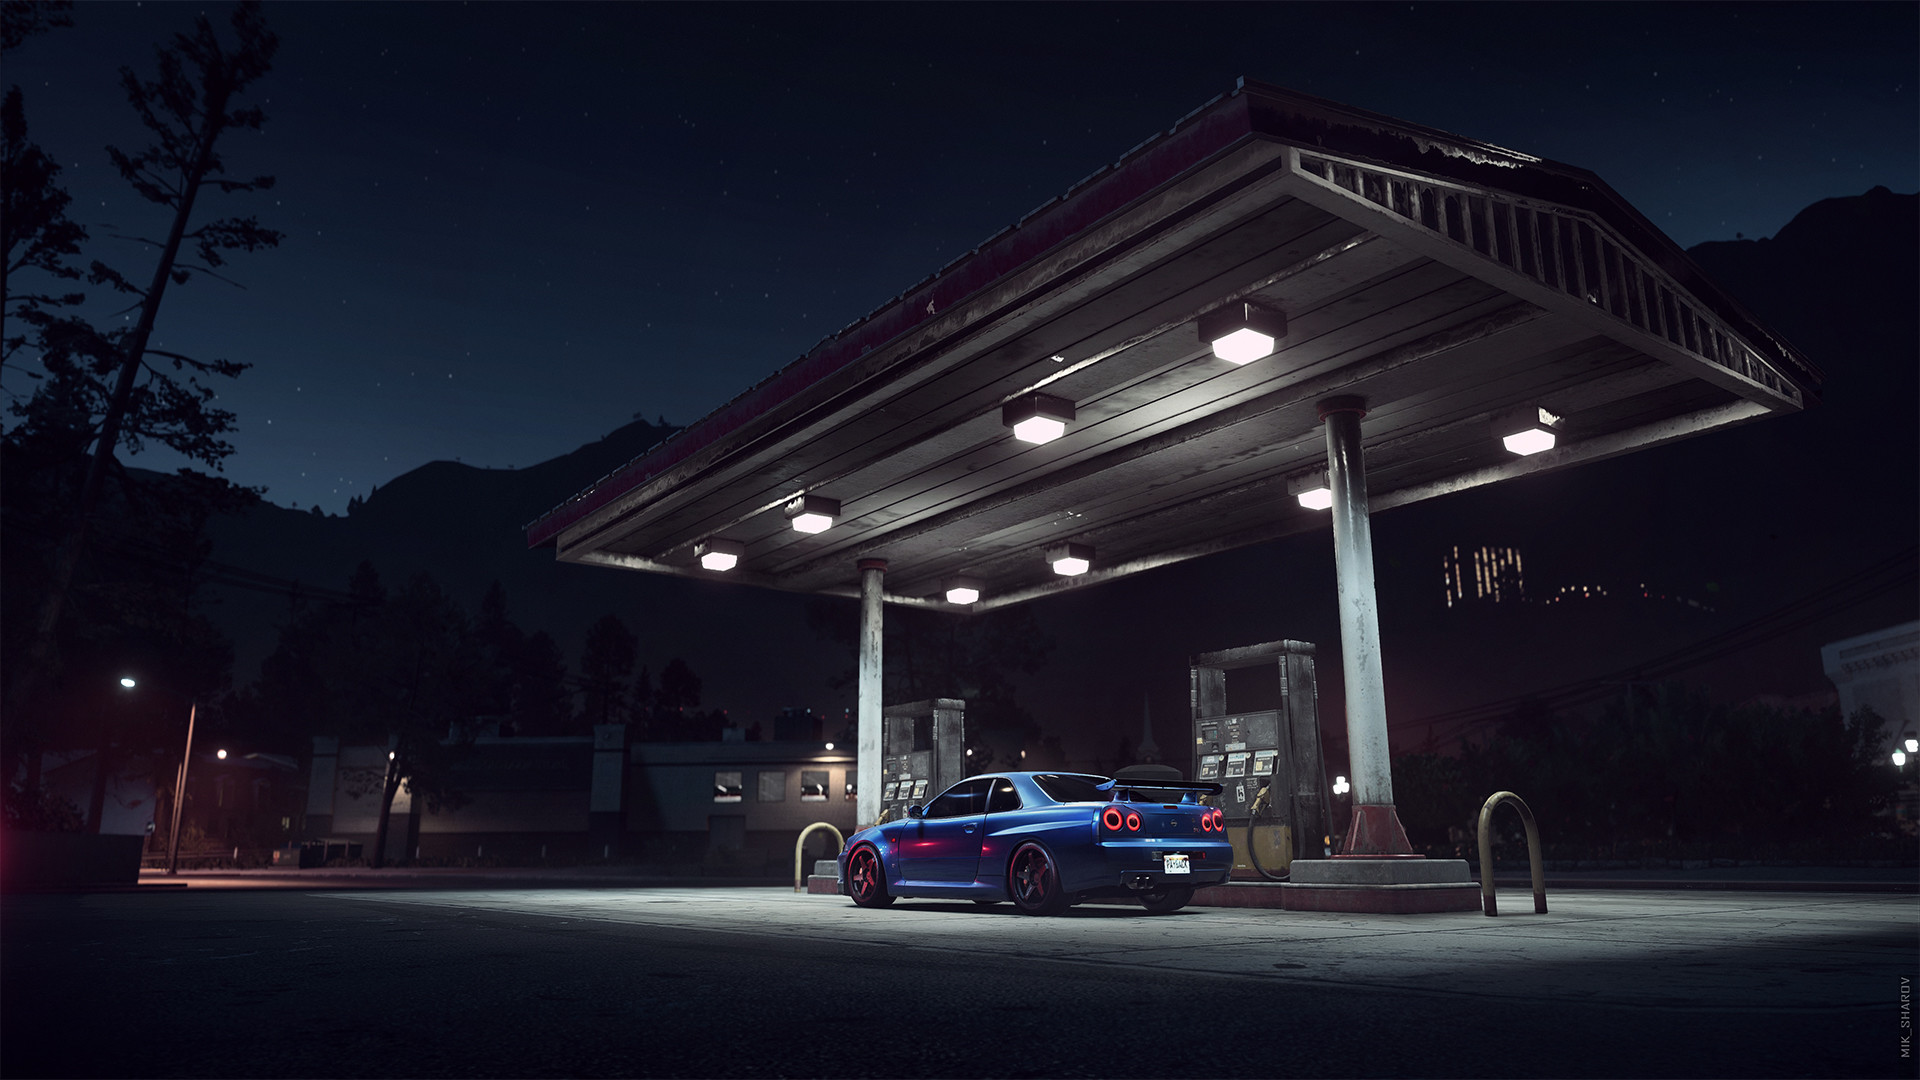 General 1920x1080 nightscape Nissan Nissan Skyline R34 night gas station Need for Speed video game art screen shot mountains car vehicle Mikhail Sharov